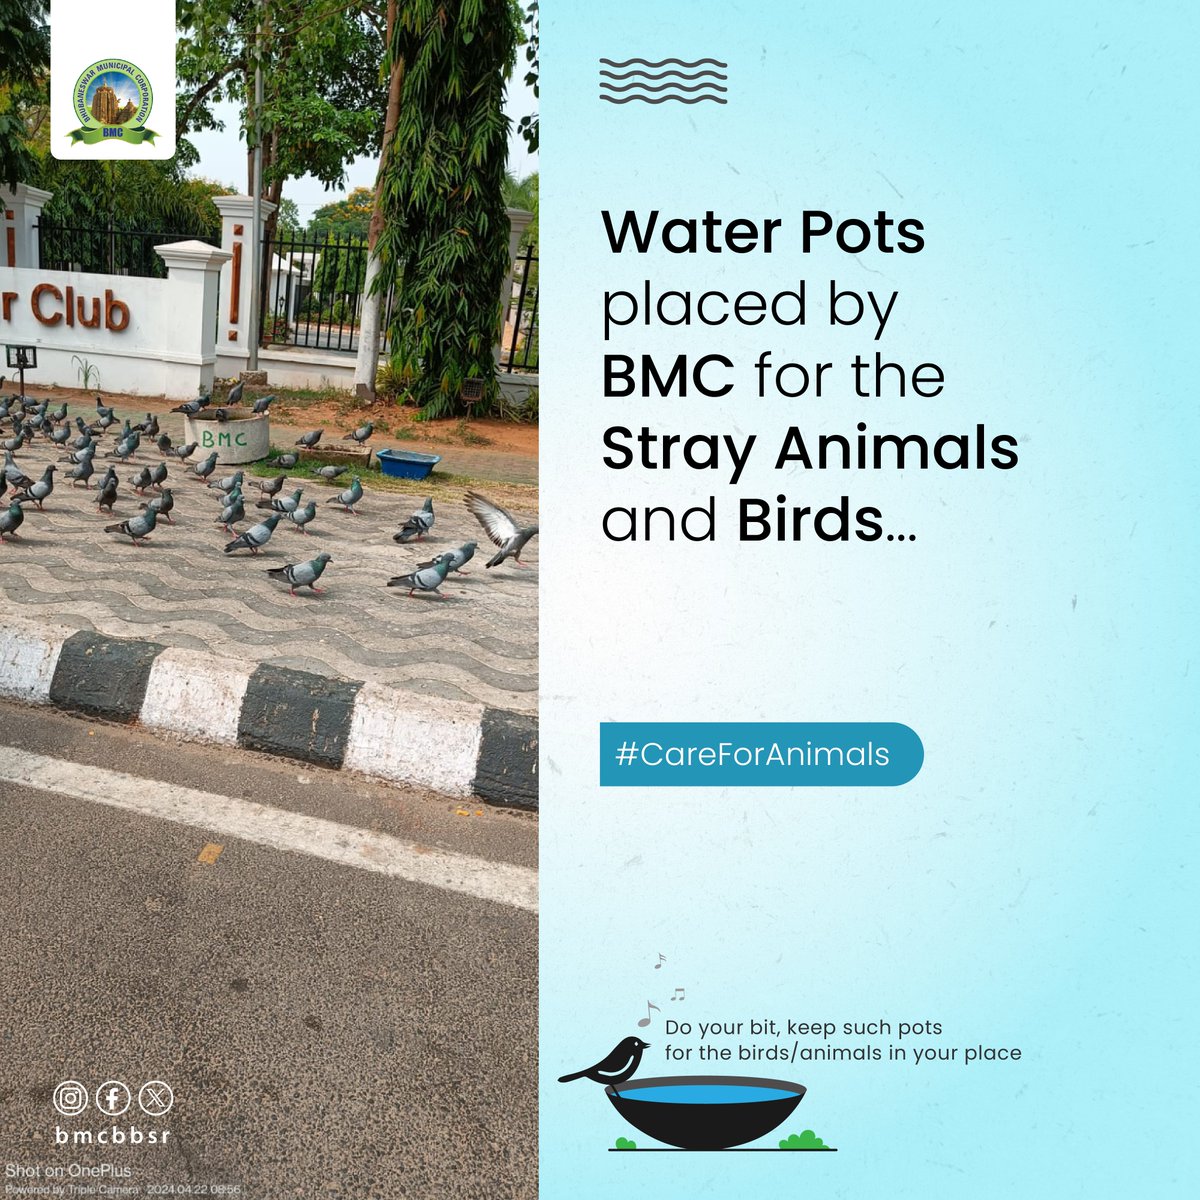 The water pots placed by BMC at many places across the city for the animals/birds are helping them quench their thirst in this hot weather. We request all citizens to come forward and do their bit by keeping water pots in their place for the stray animals/birds. #CareForAnimals…